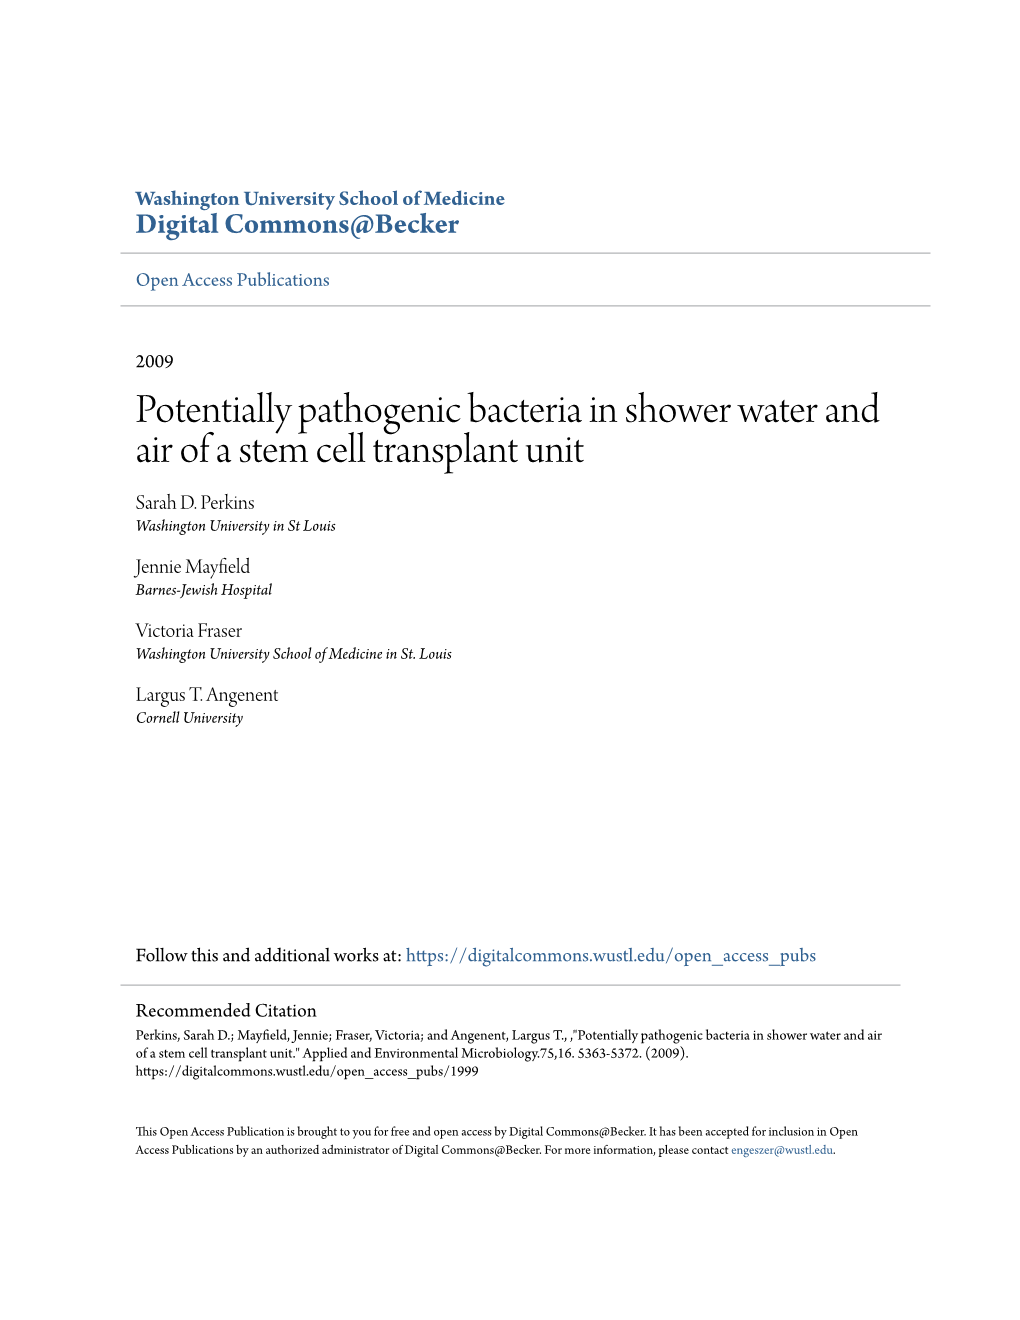 Potentially Pathogenic Bacteria in Shower Water and Air of a Stem Cell Transplant Unit Sarah D